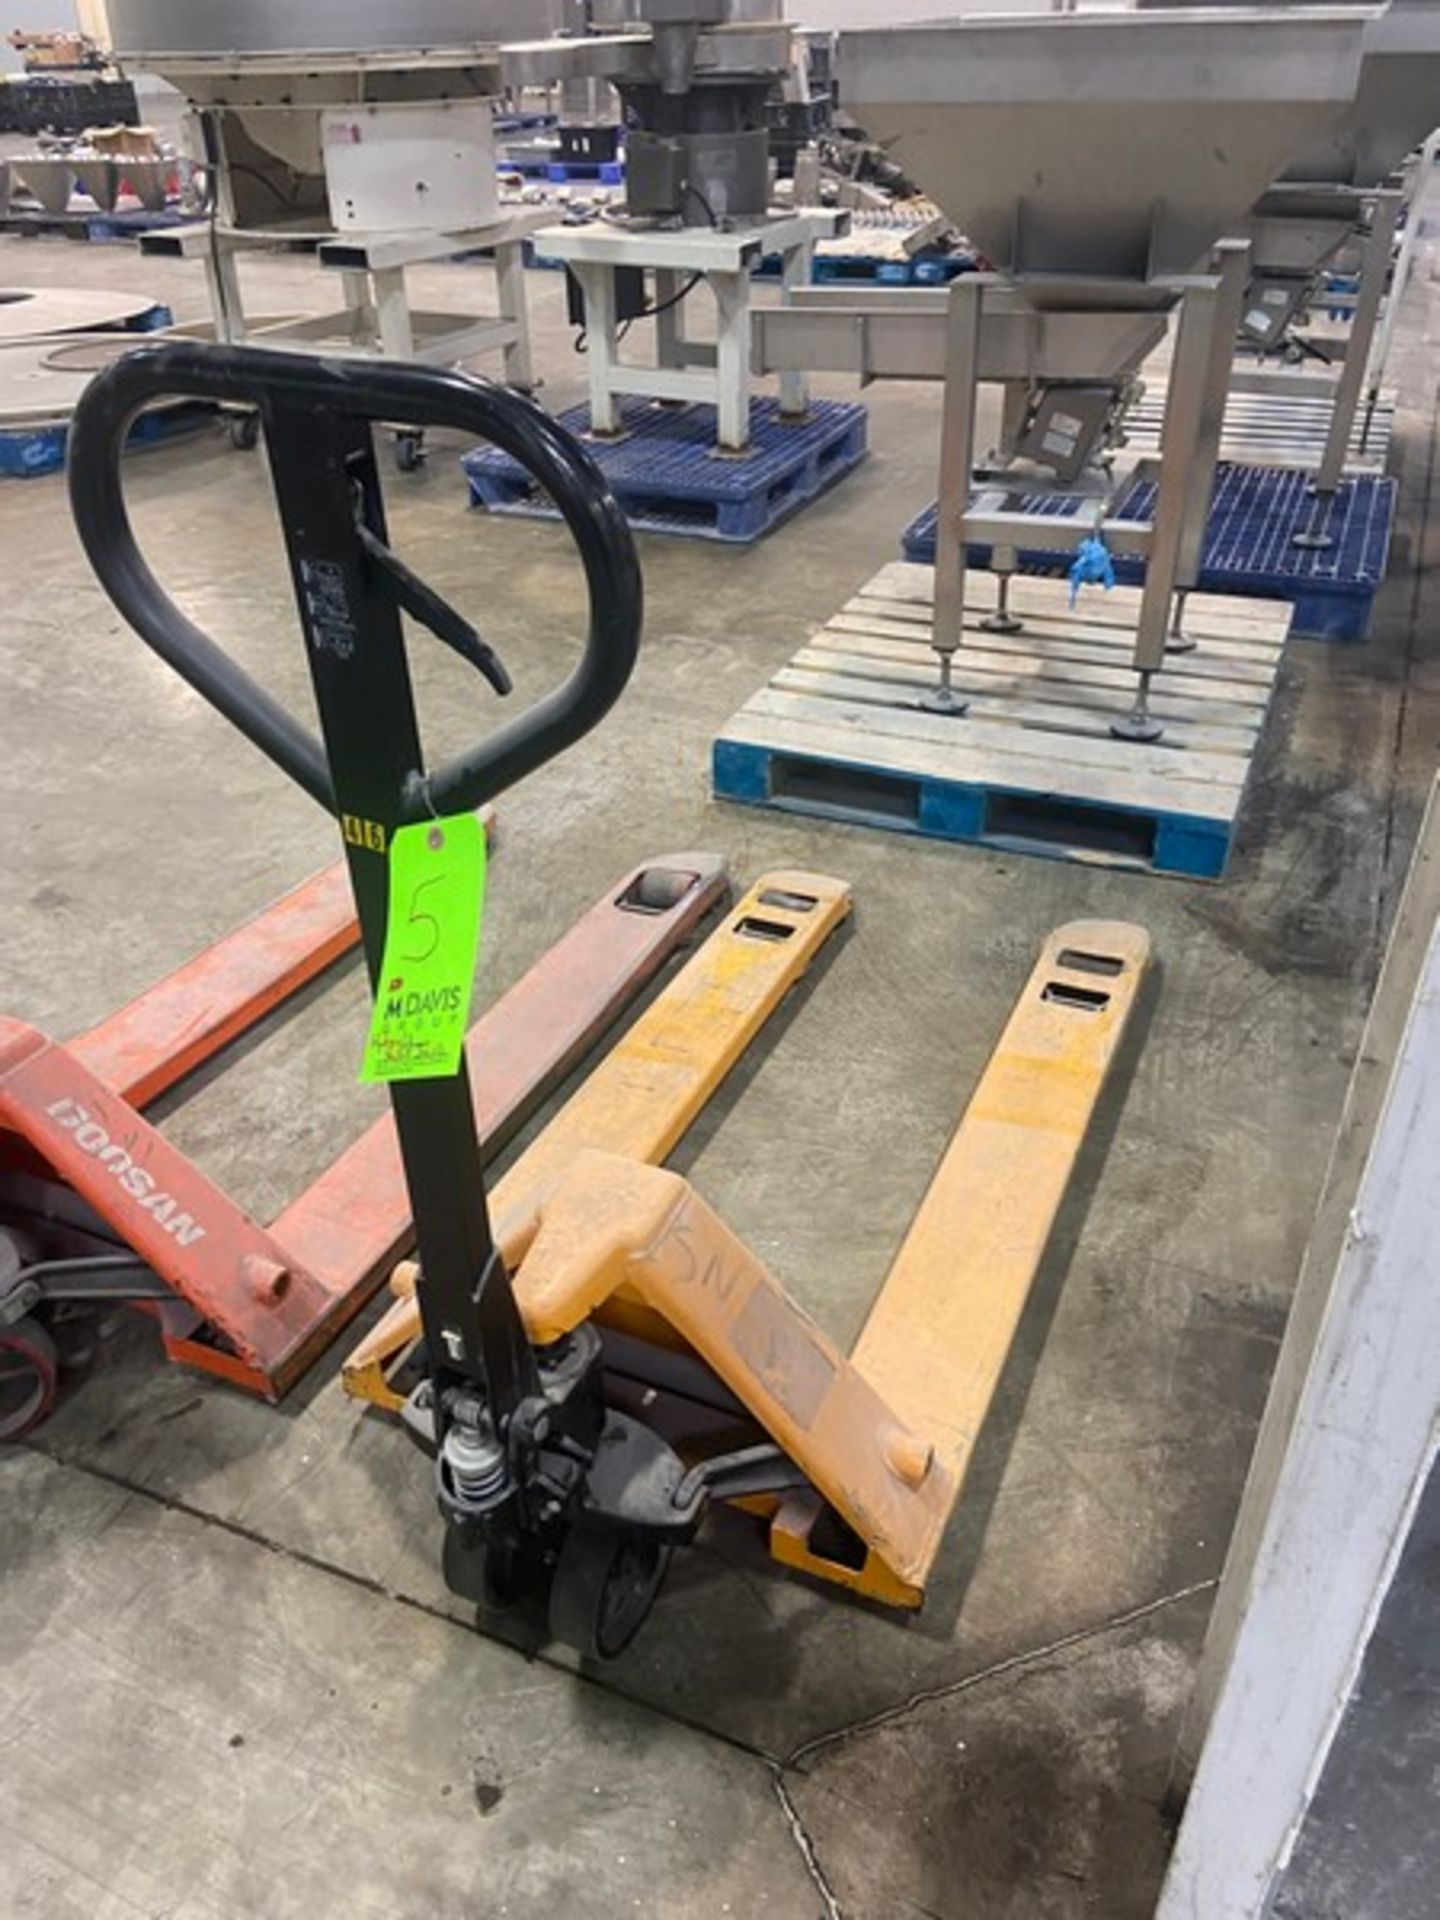 Hydraulic Pallet Jack (RIGGING, LOADING, SITE MANAGEMENT FEE: $25.00 USD)(LOCATED IN ATLANTA, GA) - Image 2 of 3